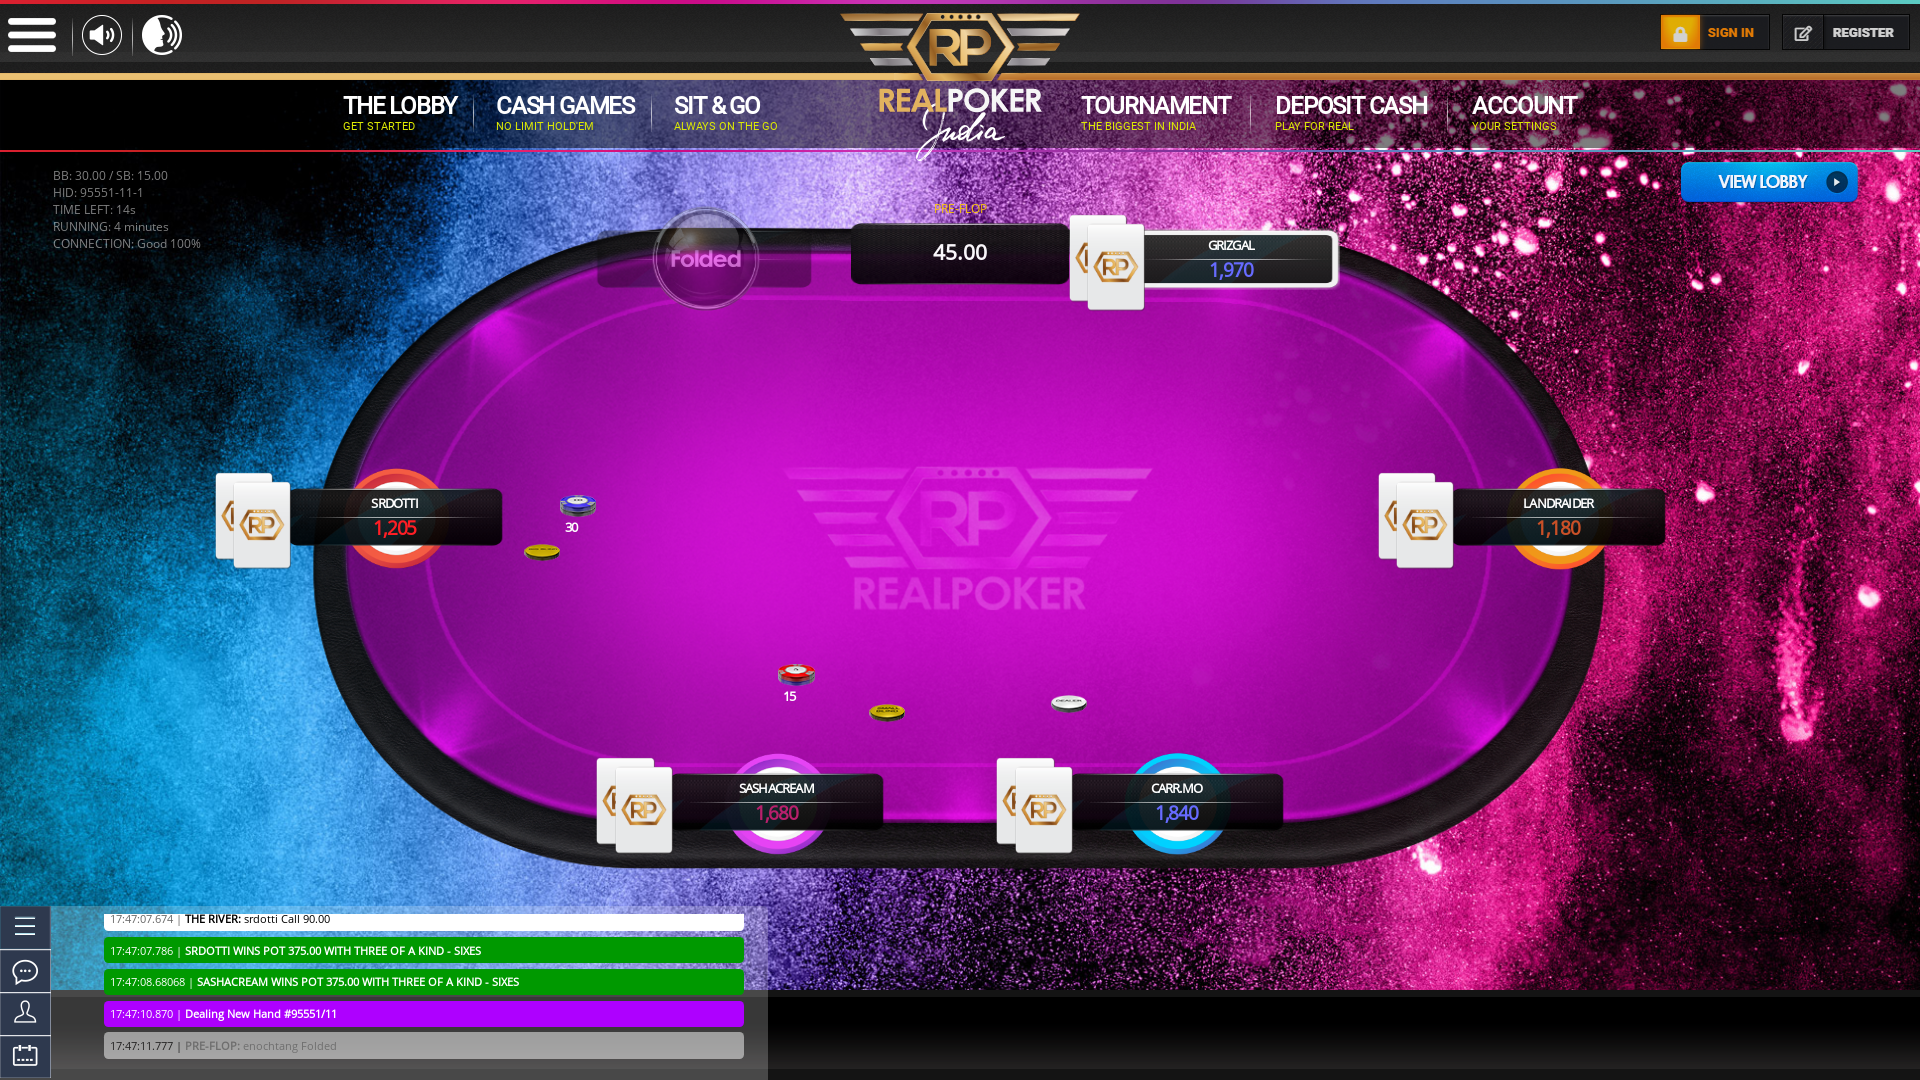 Bardez online poker game on a 6 player table in the 4th minute of the match